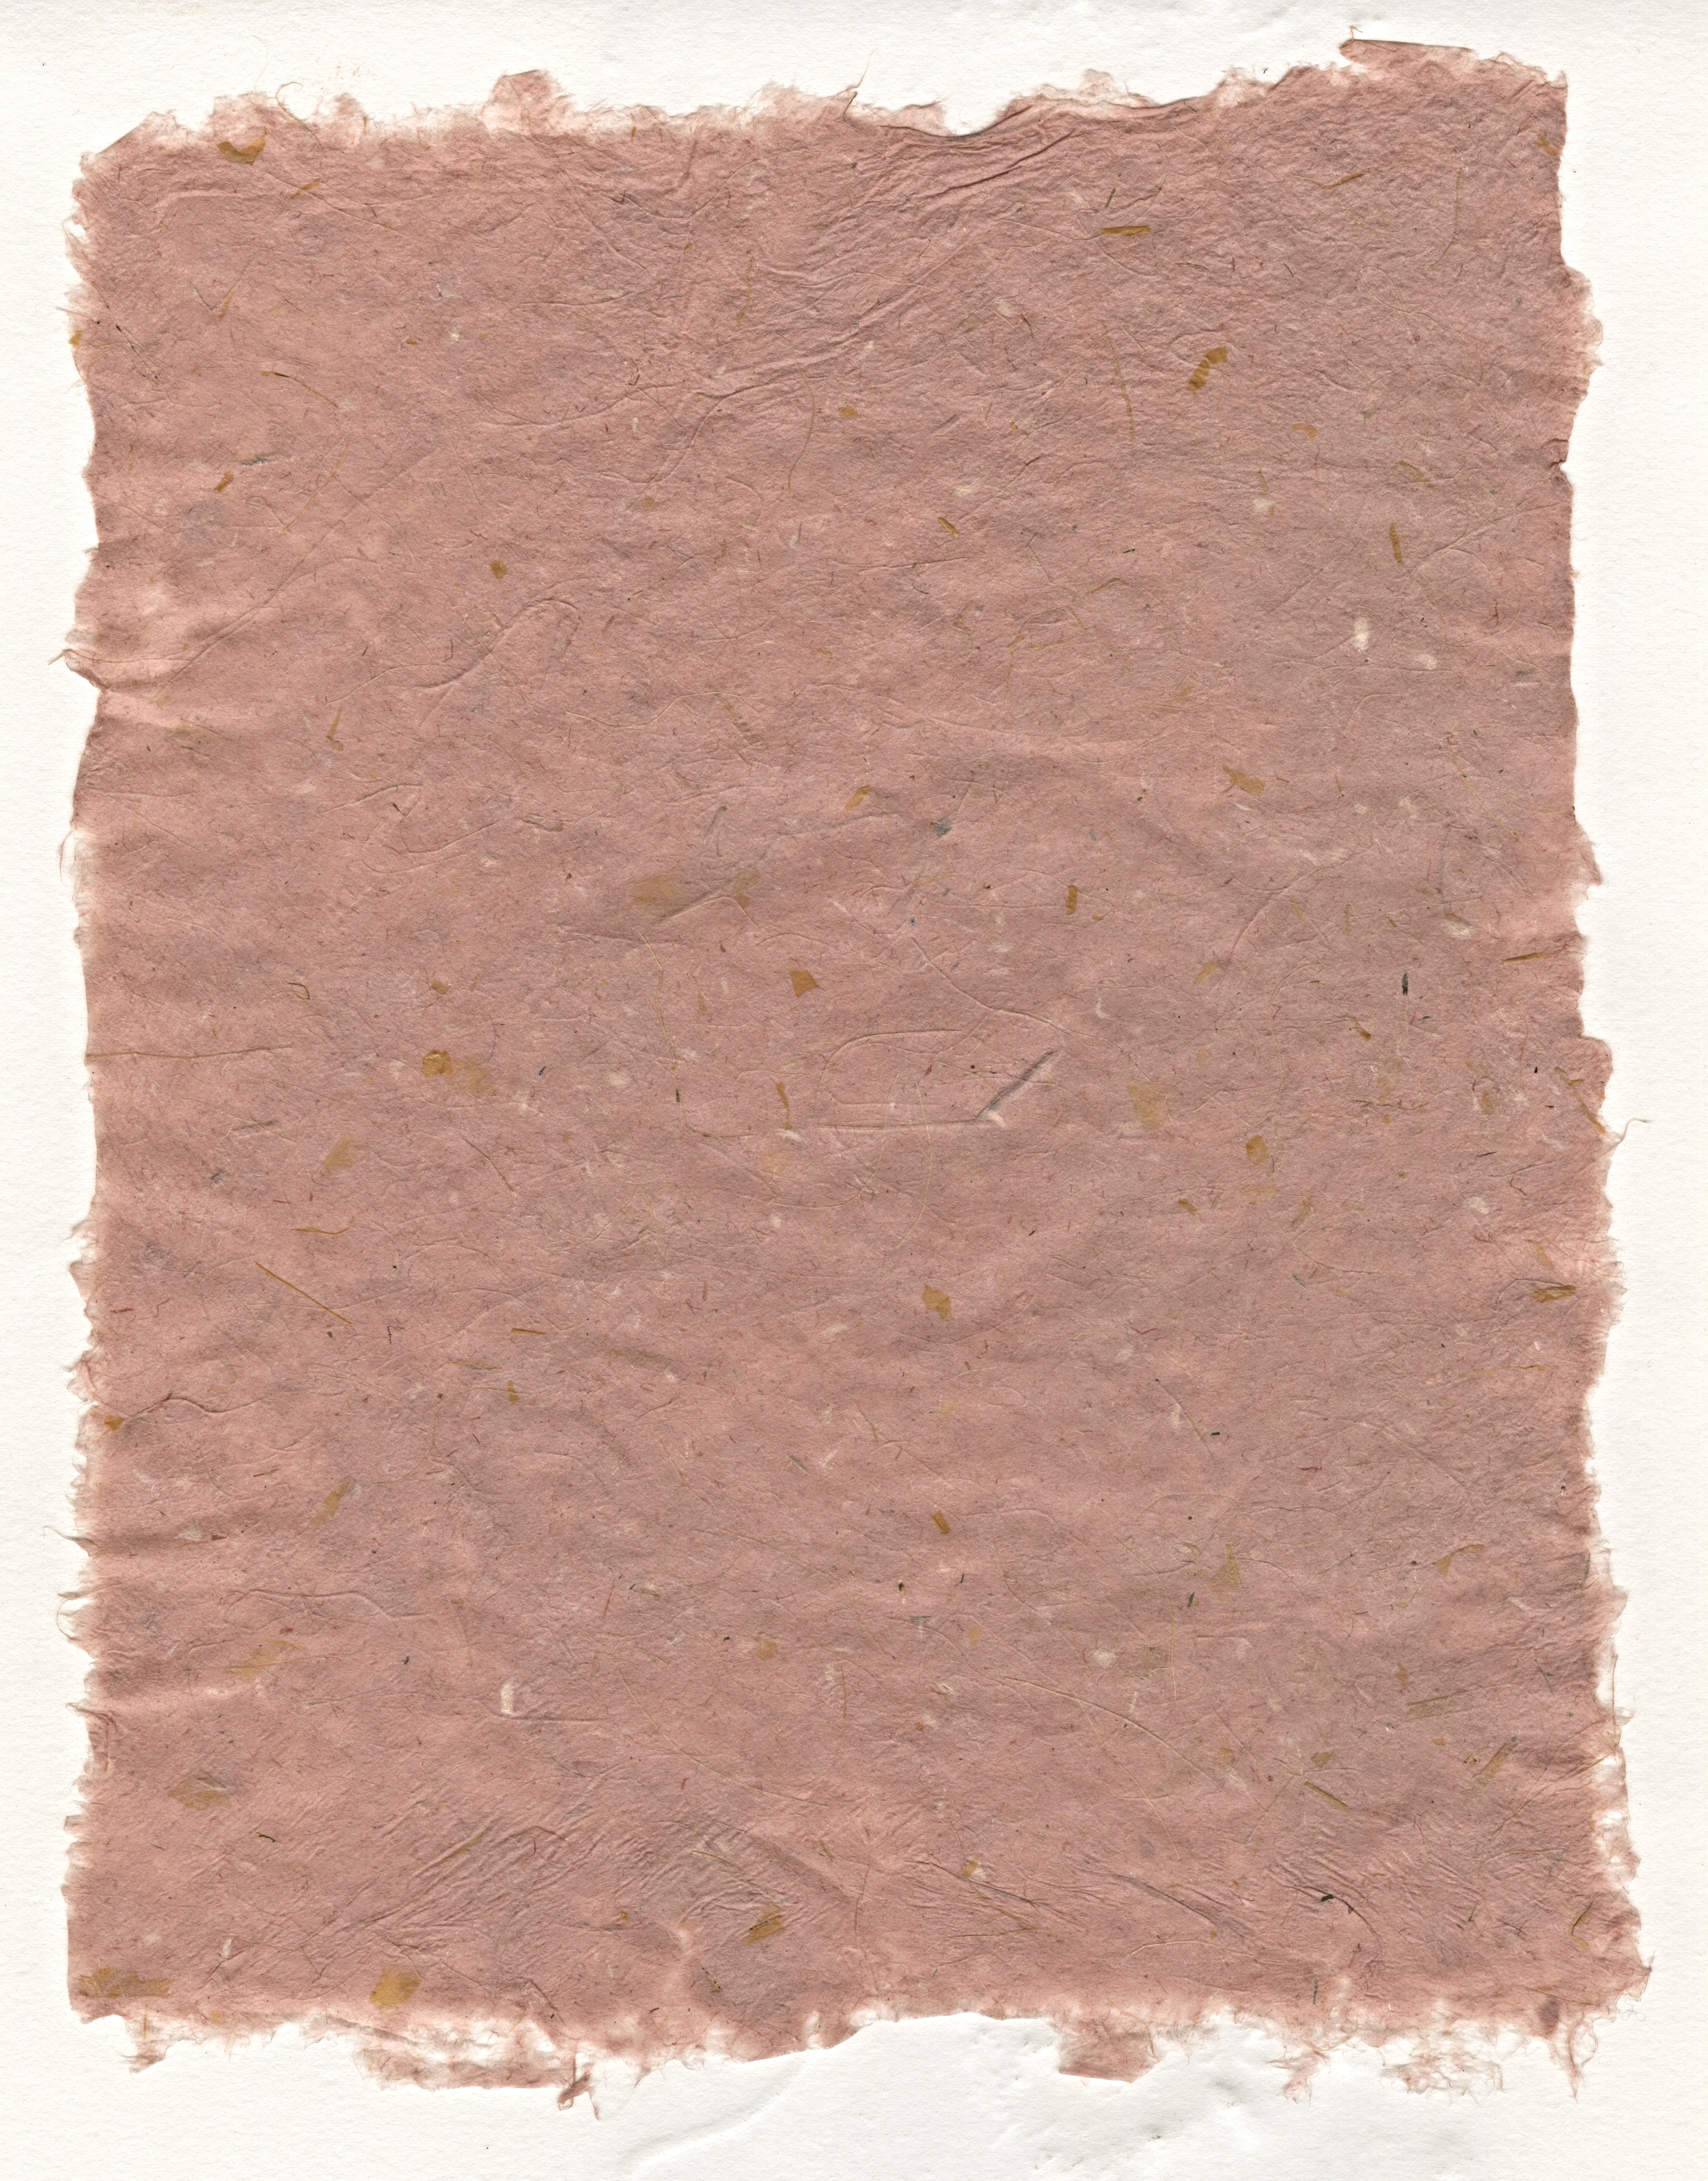 Yucca + Dracaena + Cordyline + Madder Root-Dyed Abaca Paper | 2015